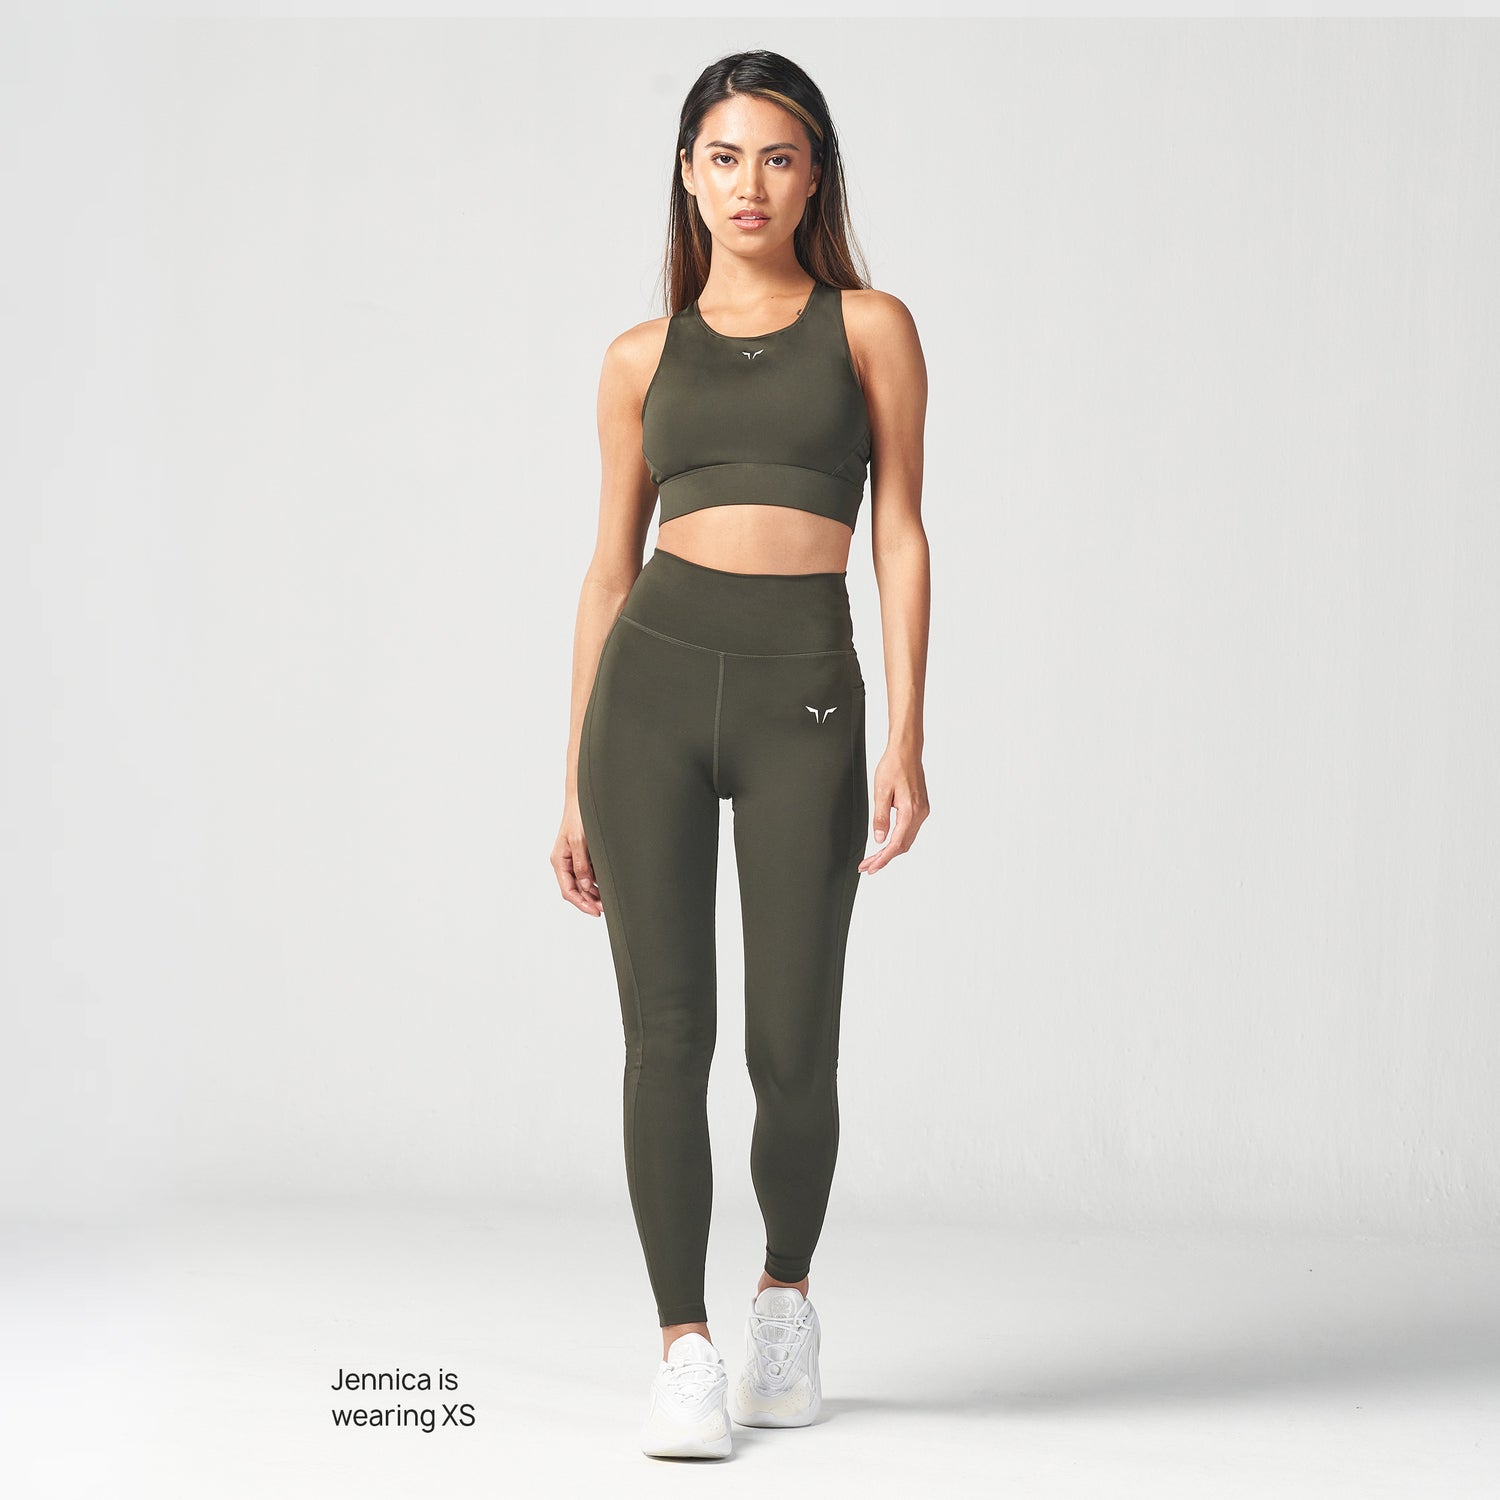 Stretched Activewear Sports Bra Yoga Pants Leggings Set Manufacturer in  USA, Australia, Canada, UAE and Europe